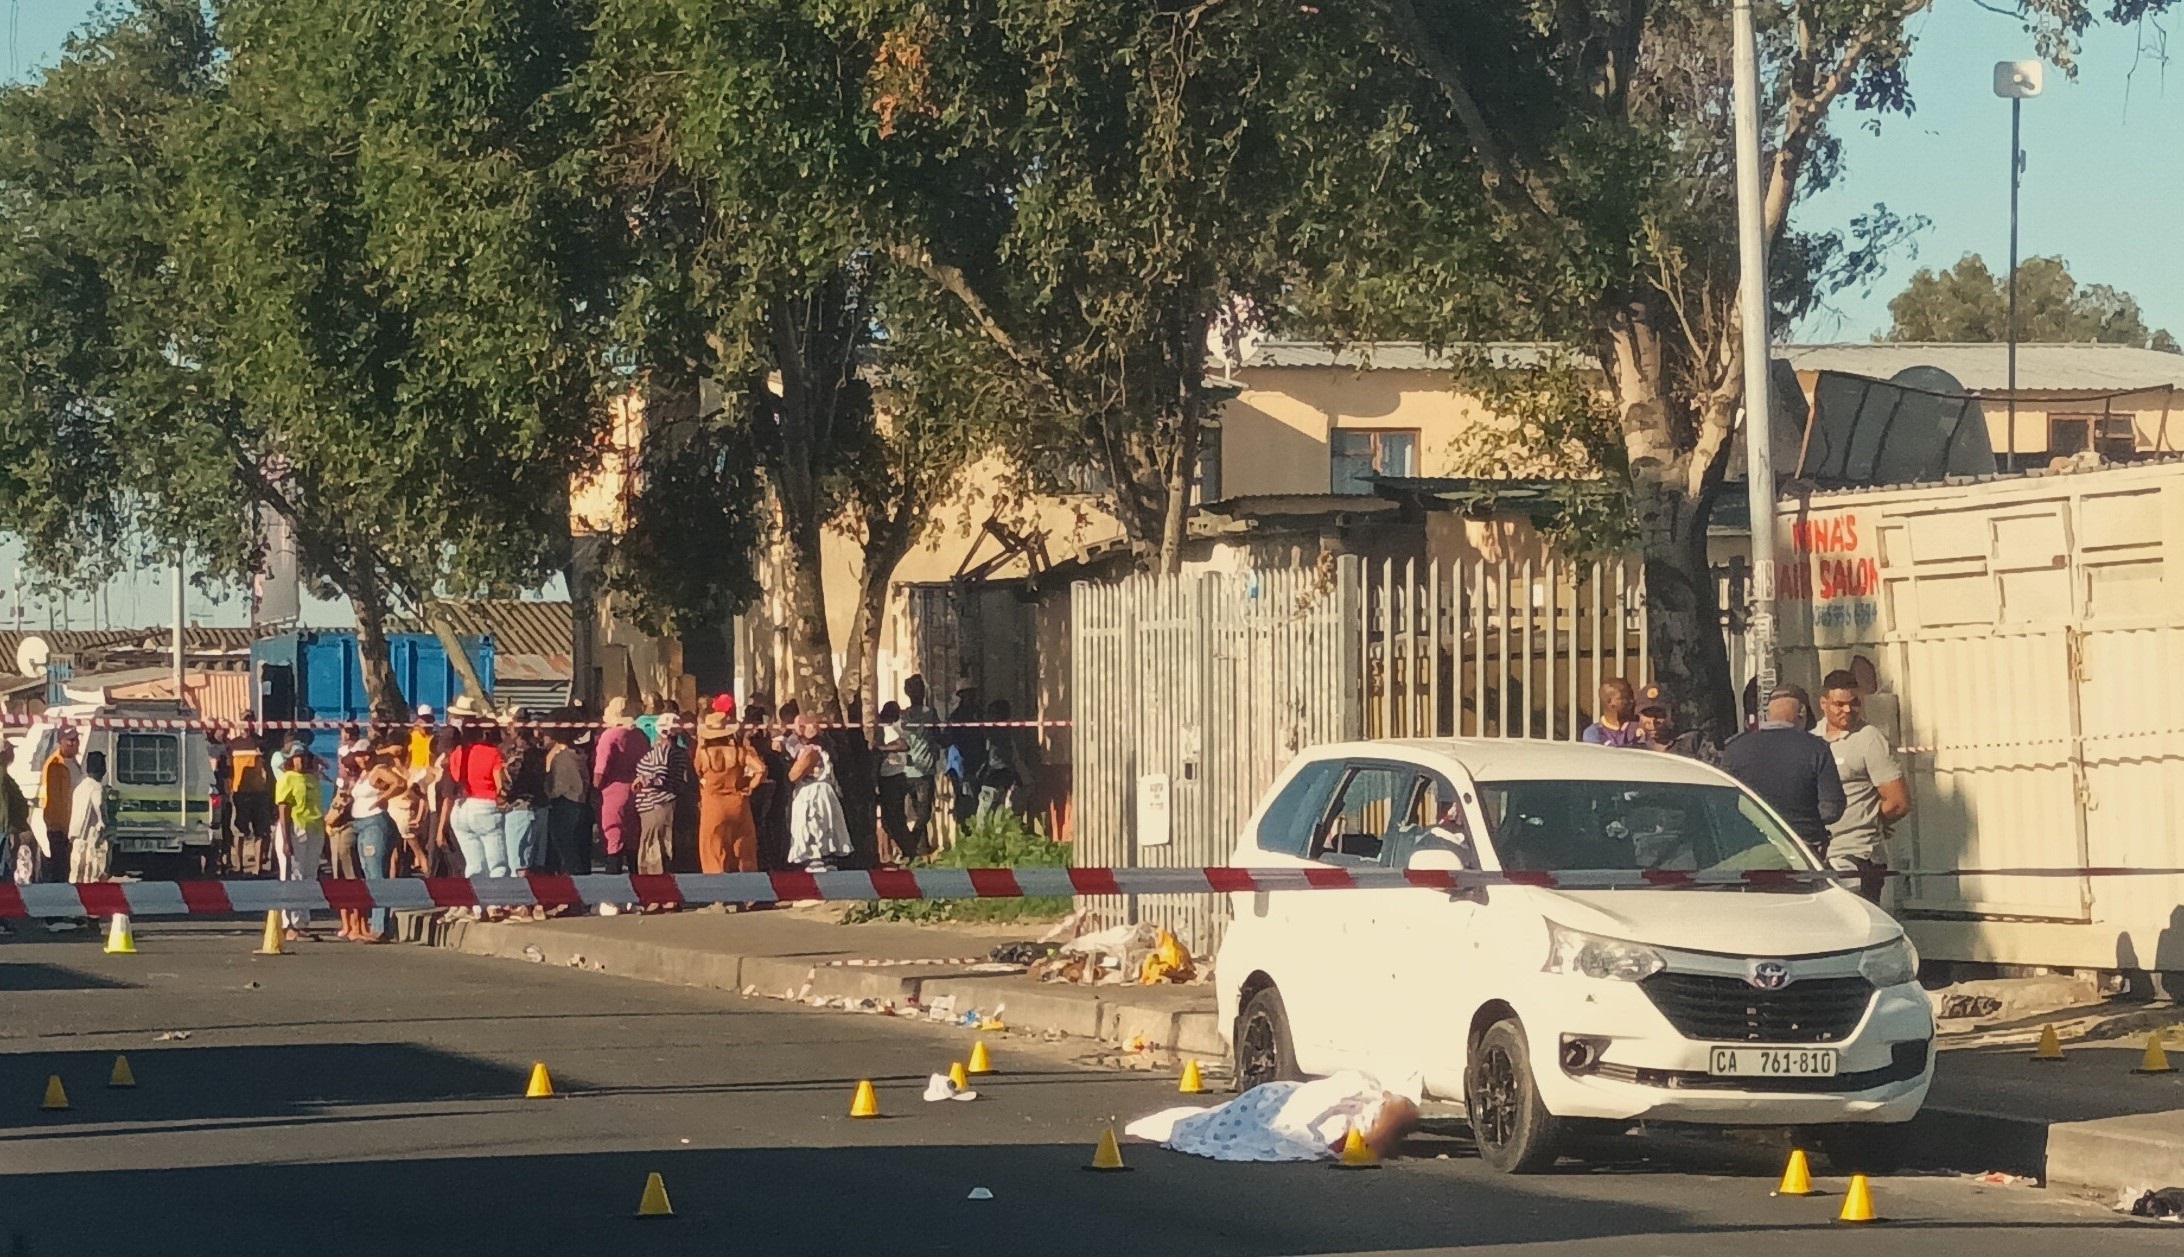 Three people killed in a shooting in Nyanga, Cape Town amid police’s Festive Season Safety initiative just launched